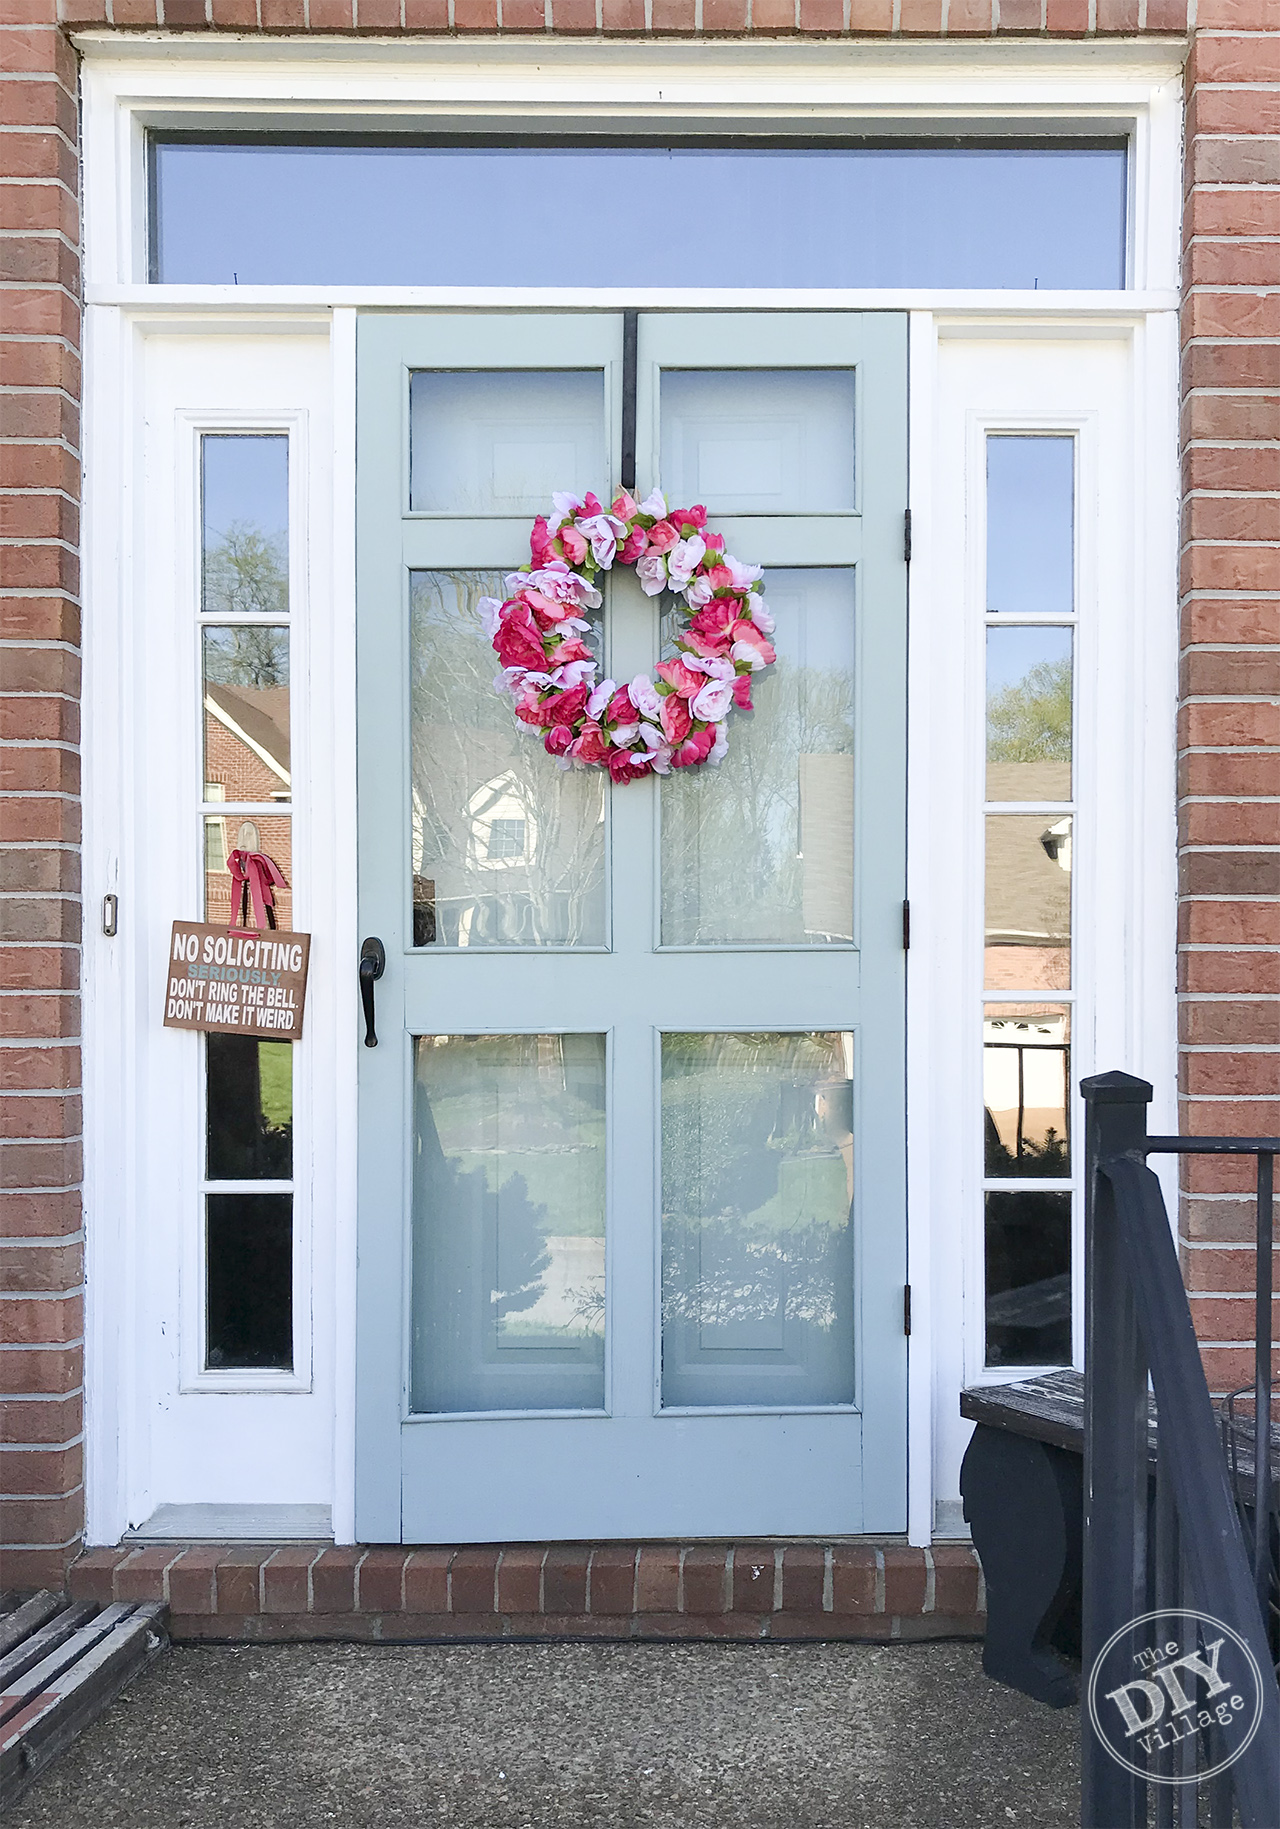 Easy pink peony wreath for under $15 #dollarstore #crafts #wreath #peony #DIY #spring #pink #frontdoors #howto